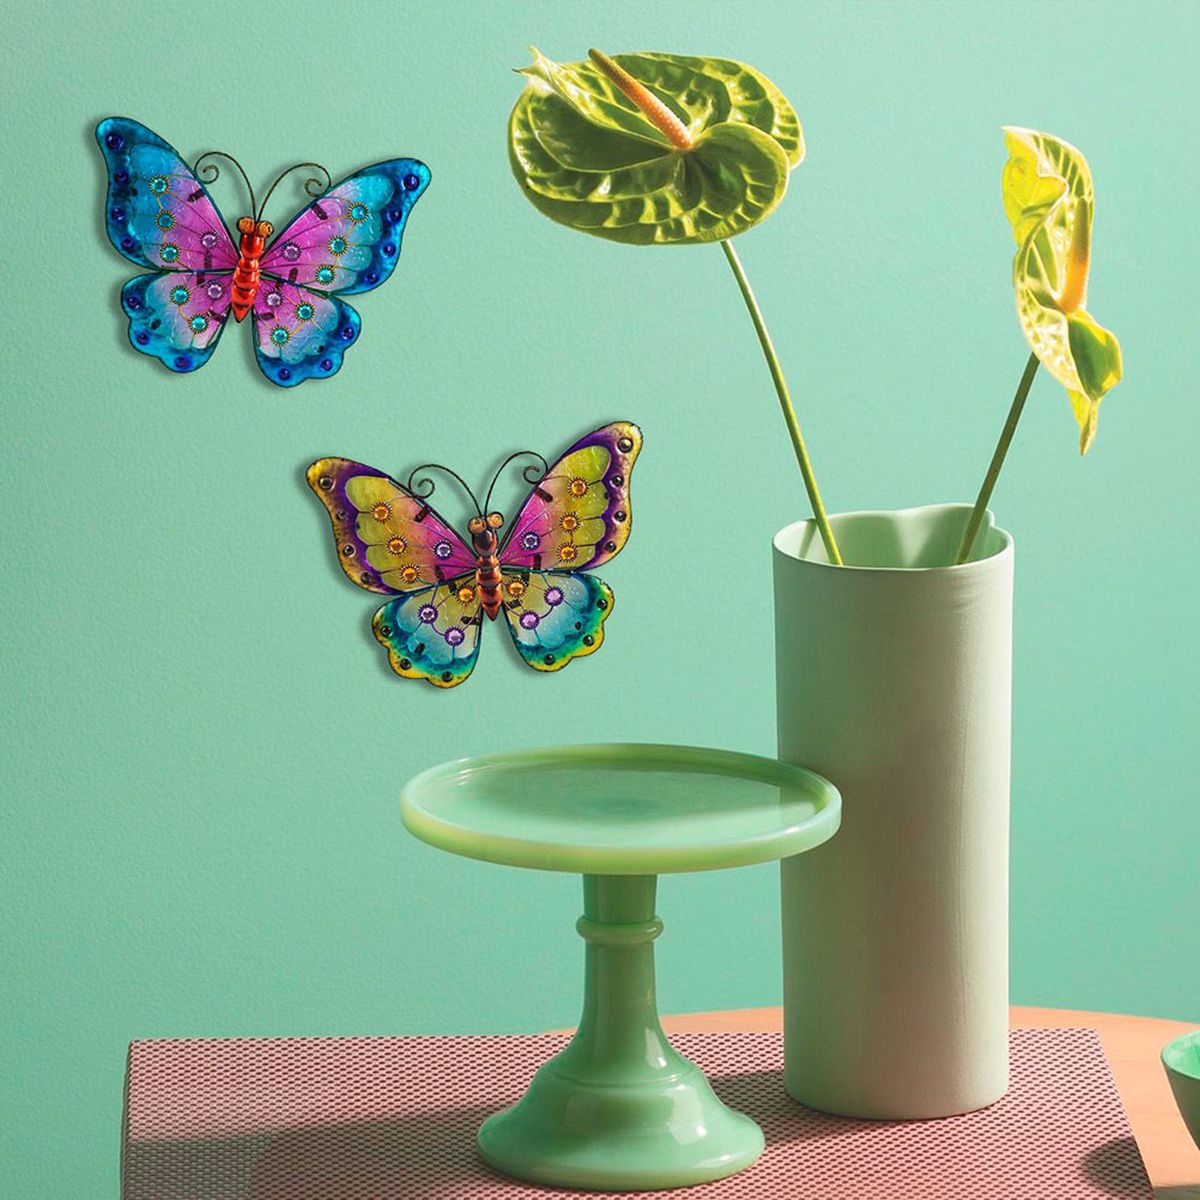 Butterfly wall decoration 21 x 25 cm - Multicolored model